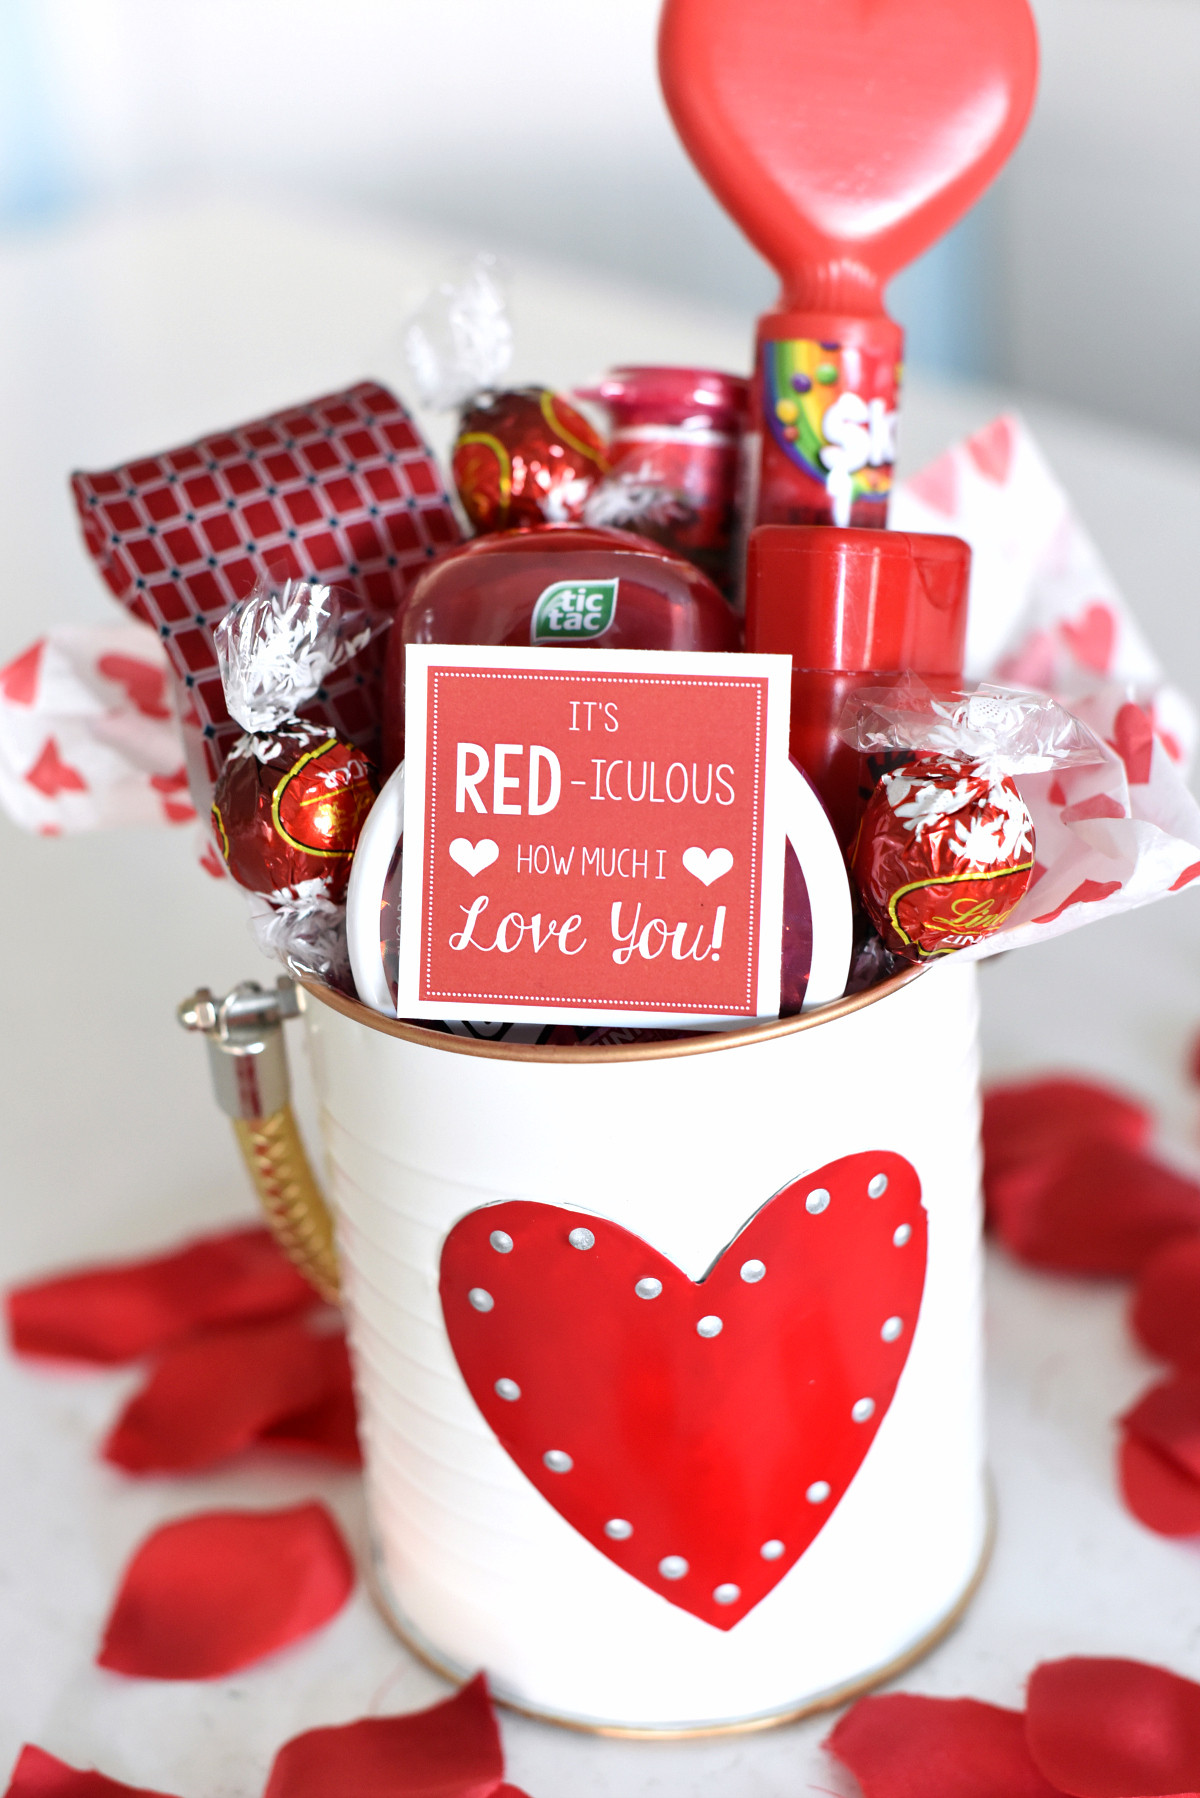 Valentines Gift For Wife Ideas
 Cute Valentine s Day Gift Idea RED iculous Basket